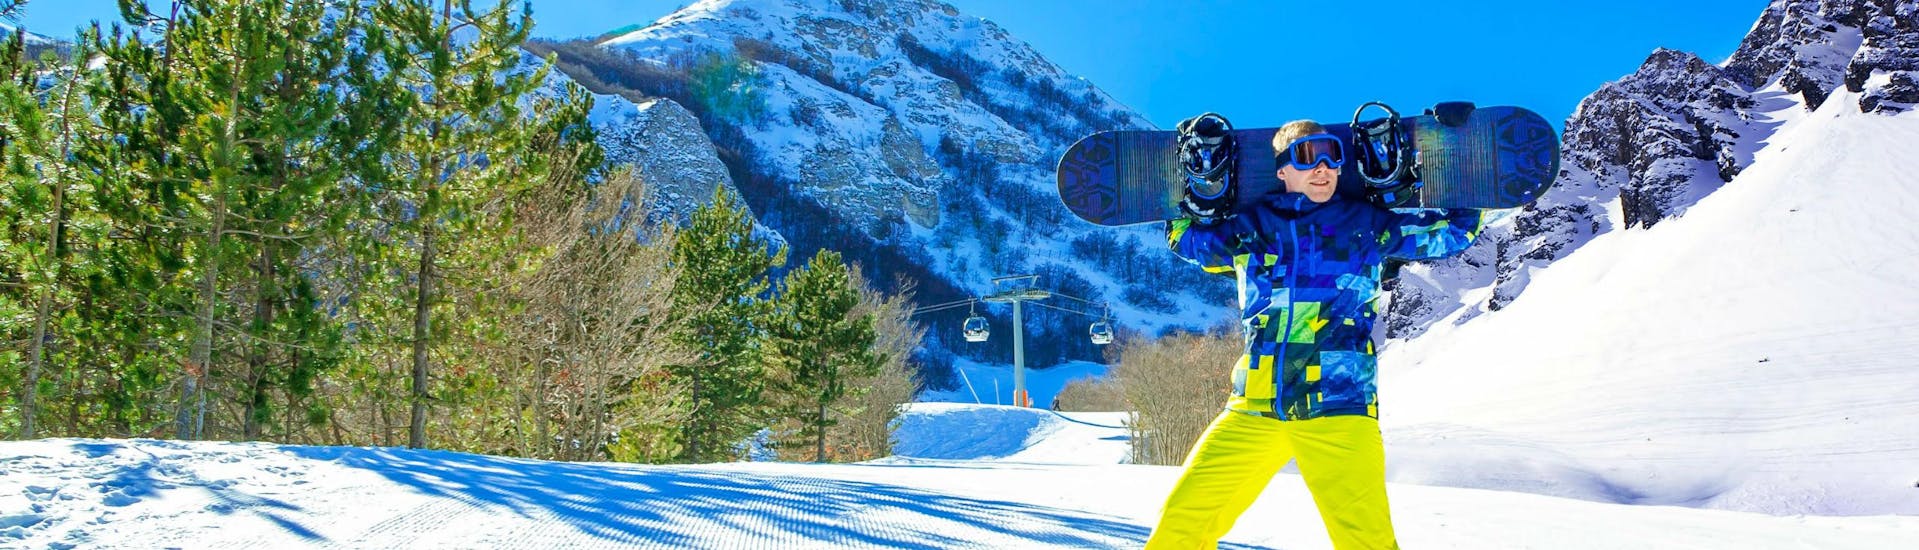 A snowboarder is posing for the camera on a sunny ski slope in the Italian ski resort of Ovindoli, where visitors can choose from a wide range of ski lessons offered by the local ski schools.